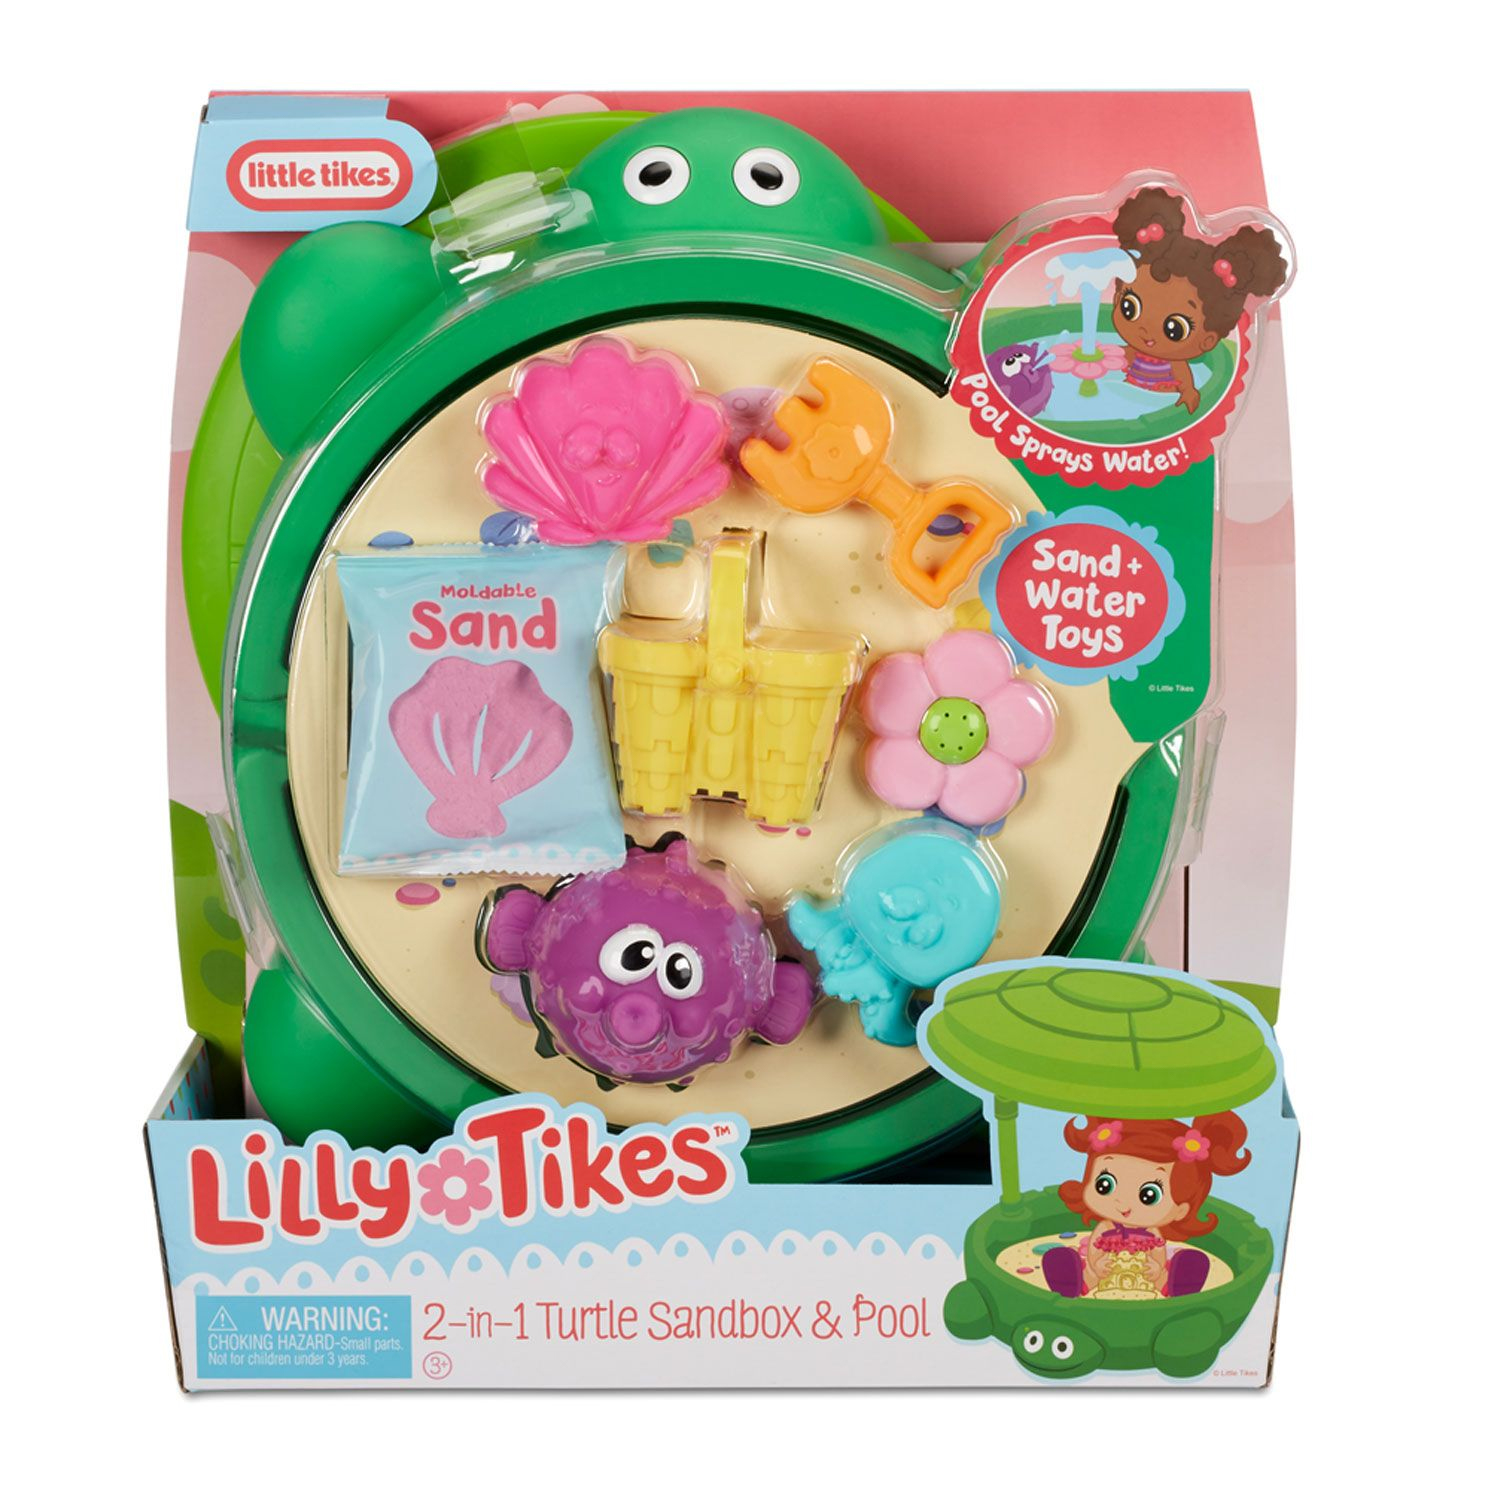 Lilly Tikes 2in1 Turle Sandbox